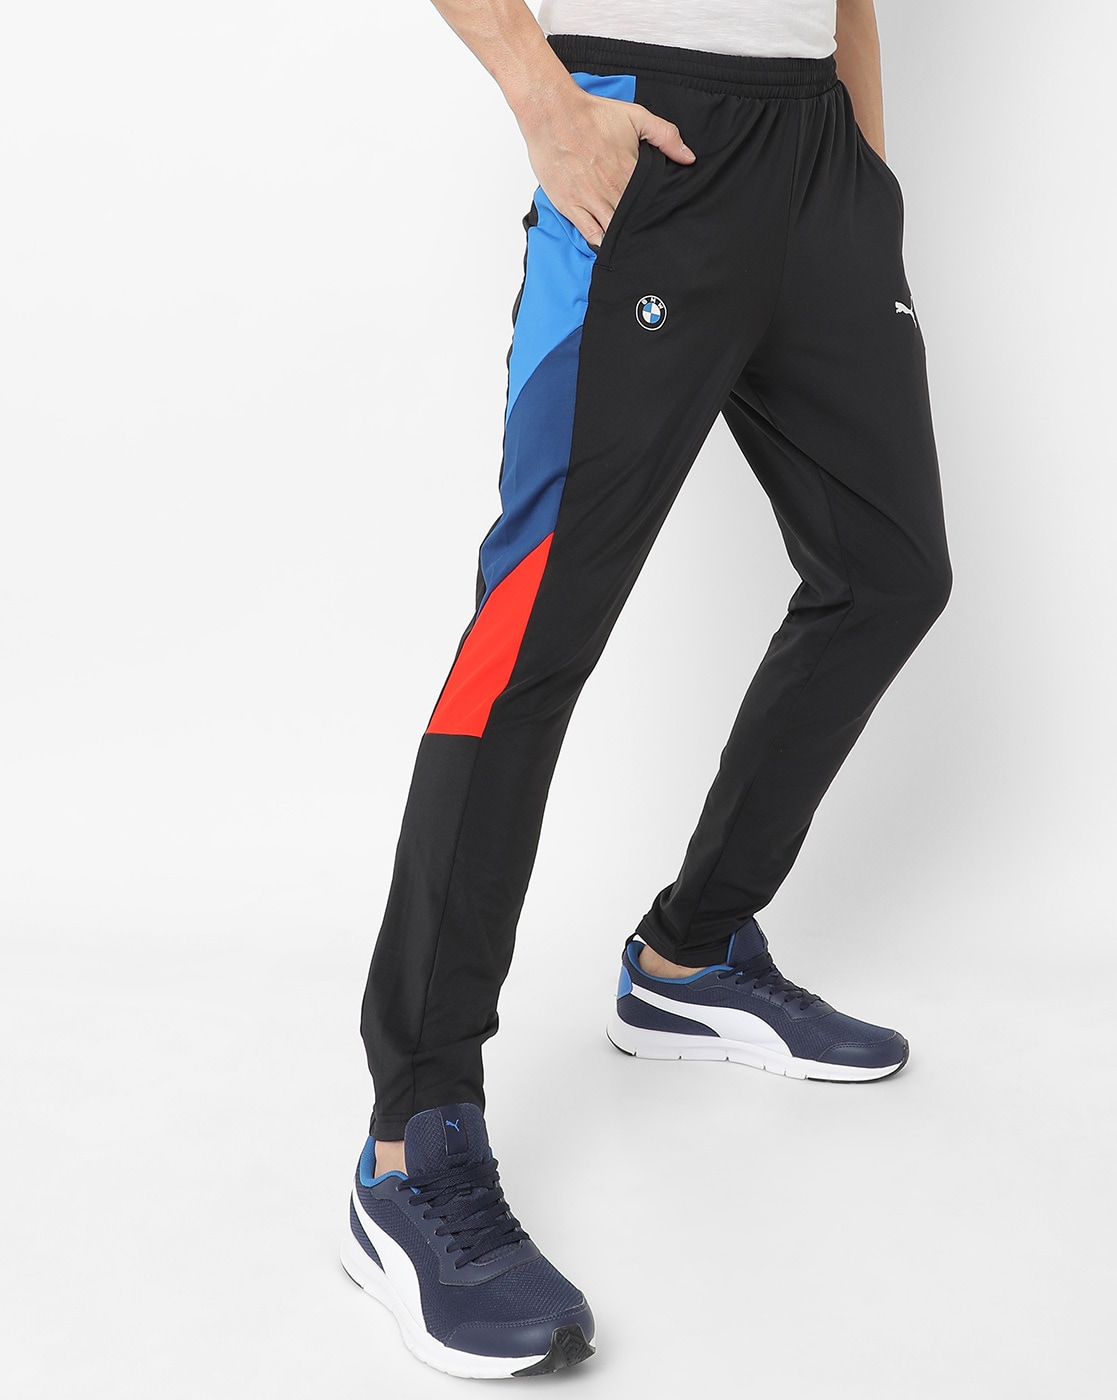 Buy Black Track Pants for Men by GUIDE Online | Ajio.com